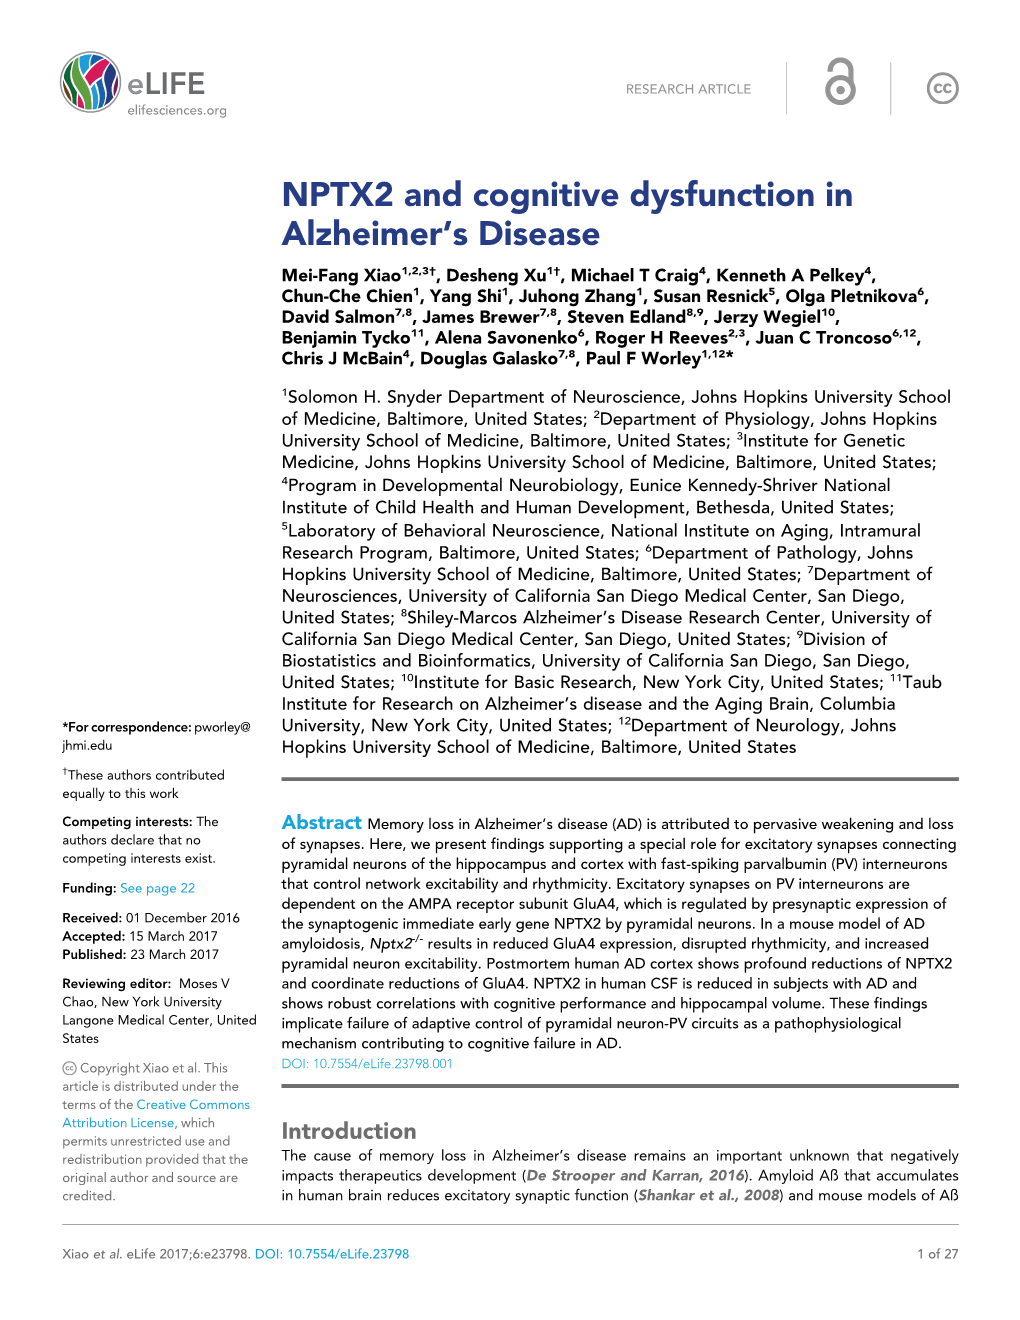 NPTX2 and Cognitive Dysfunction in Alzheimer's Disease